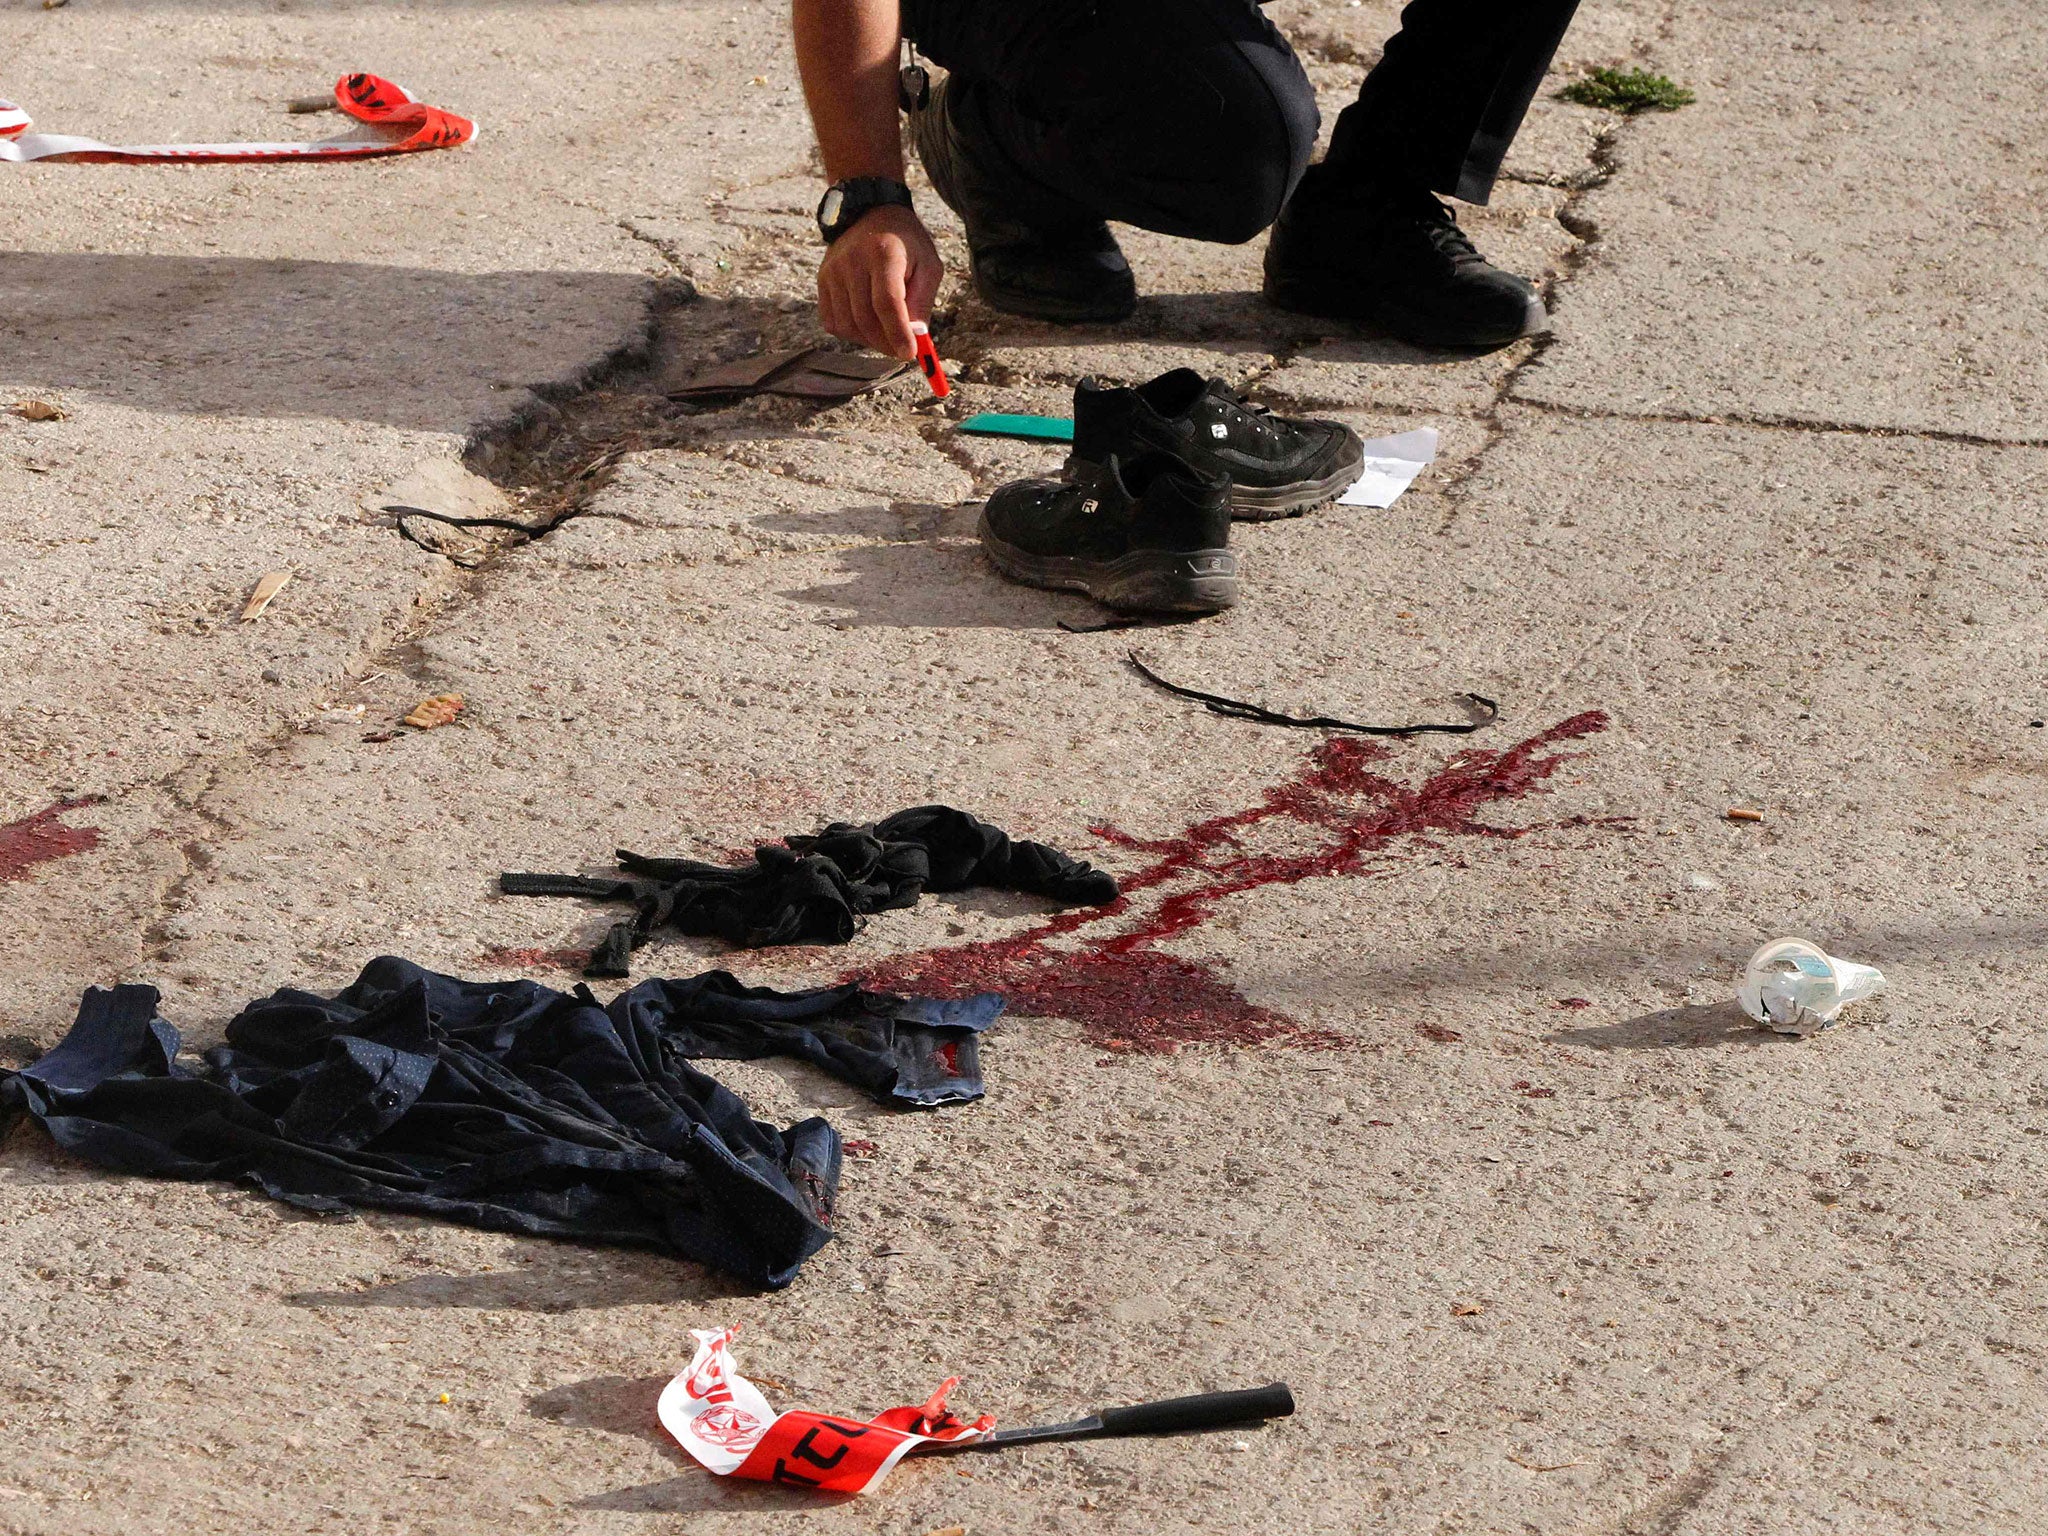 Israeli forensic police at the scene of a stabbing attack where a Palestinian was shot dead in the West Bank city of Hebron on 17 September